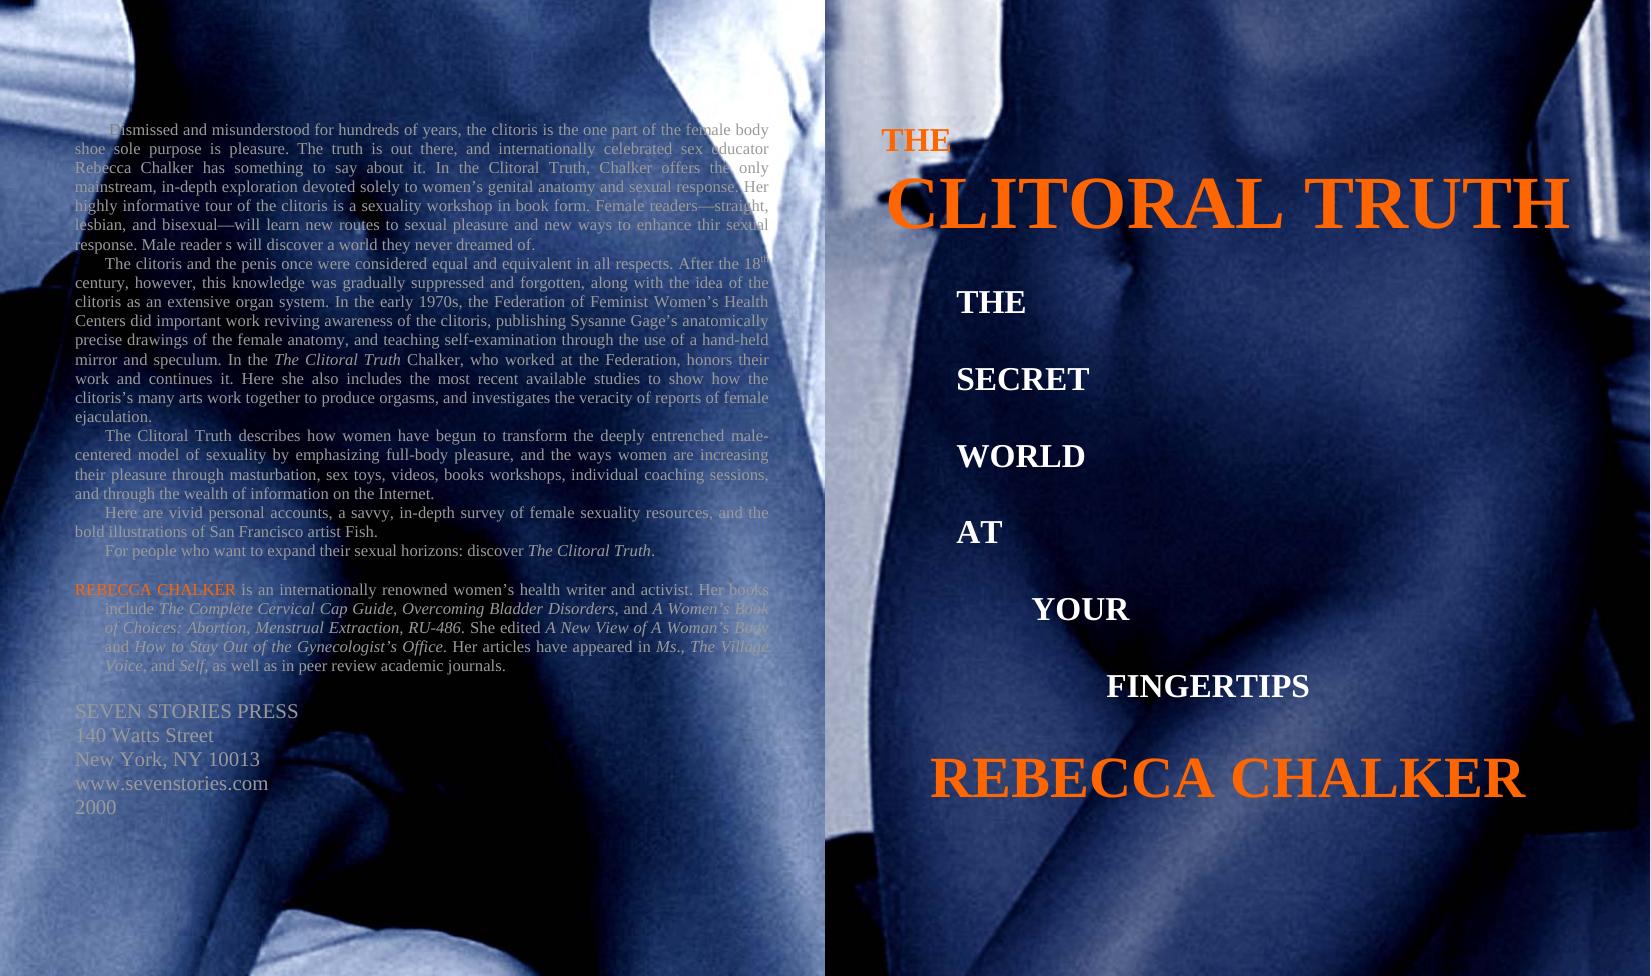 The Clitoral Truth: The Secret World at Your Fingertips by Rebecca Chalker